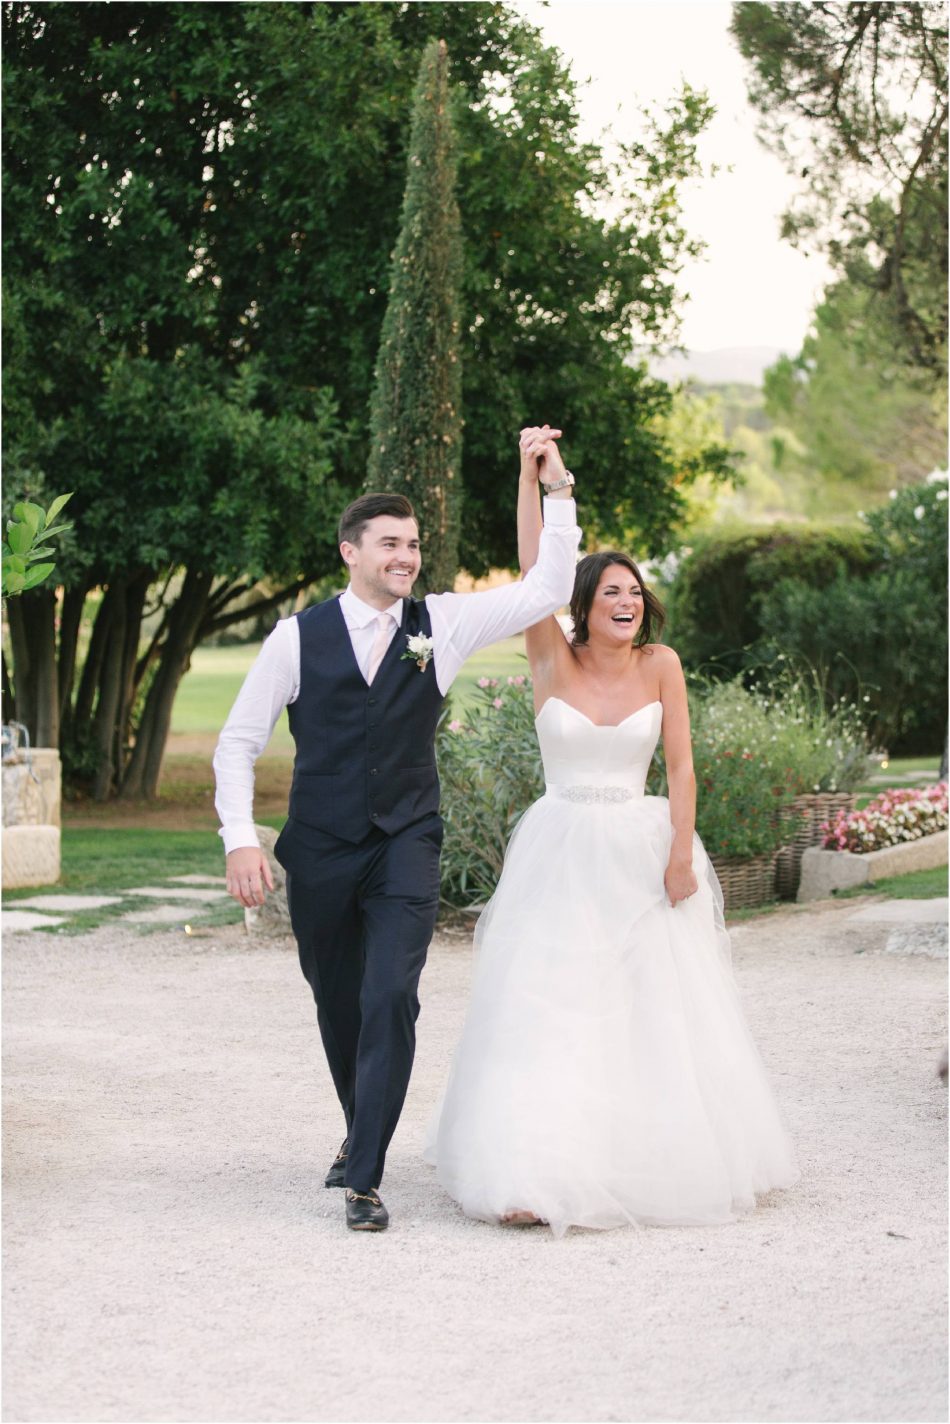 Natural, modern reportage wedding photography in Provence